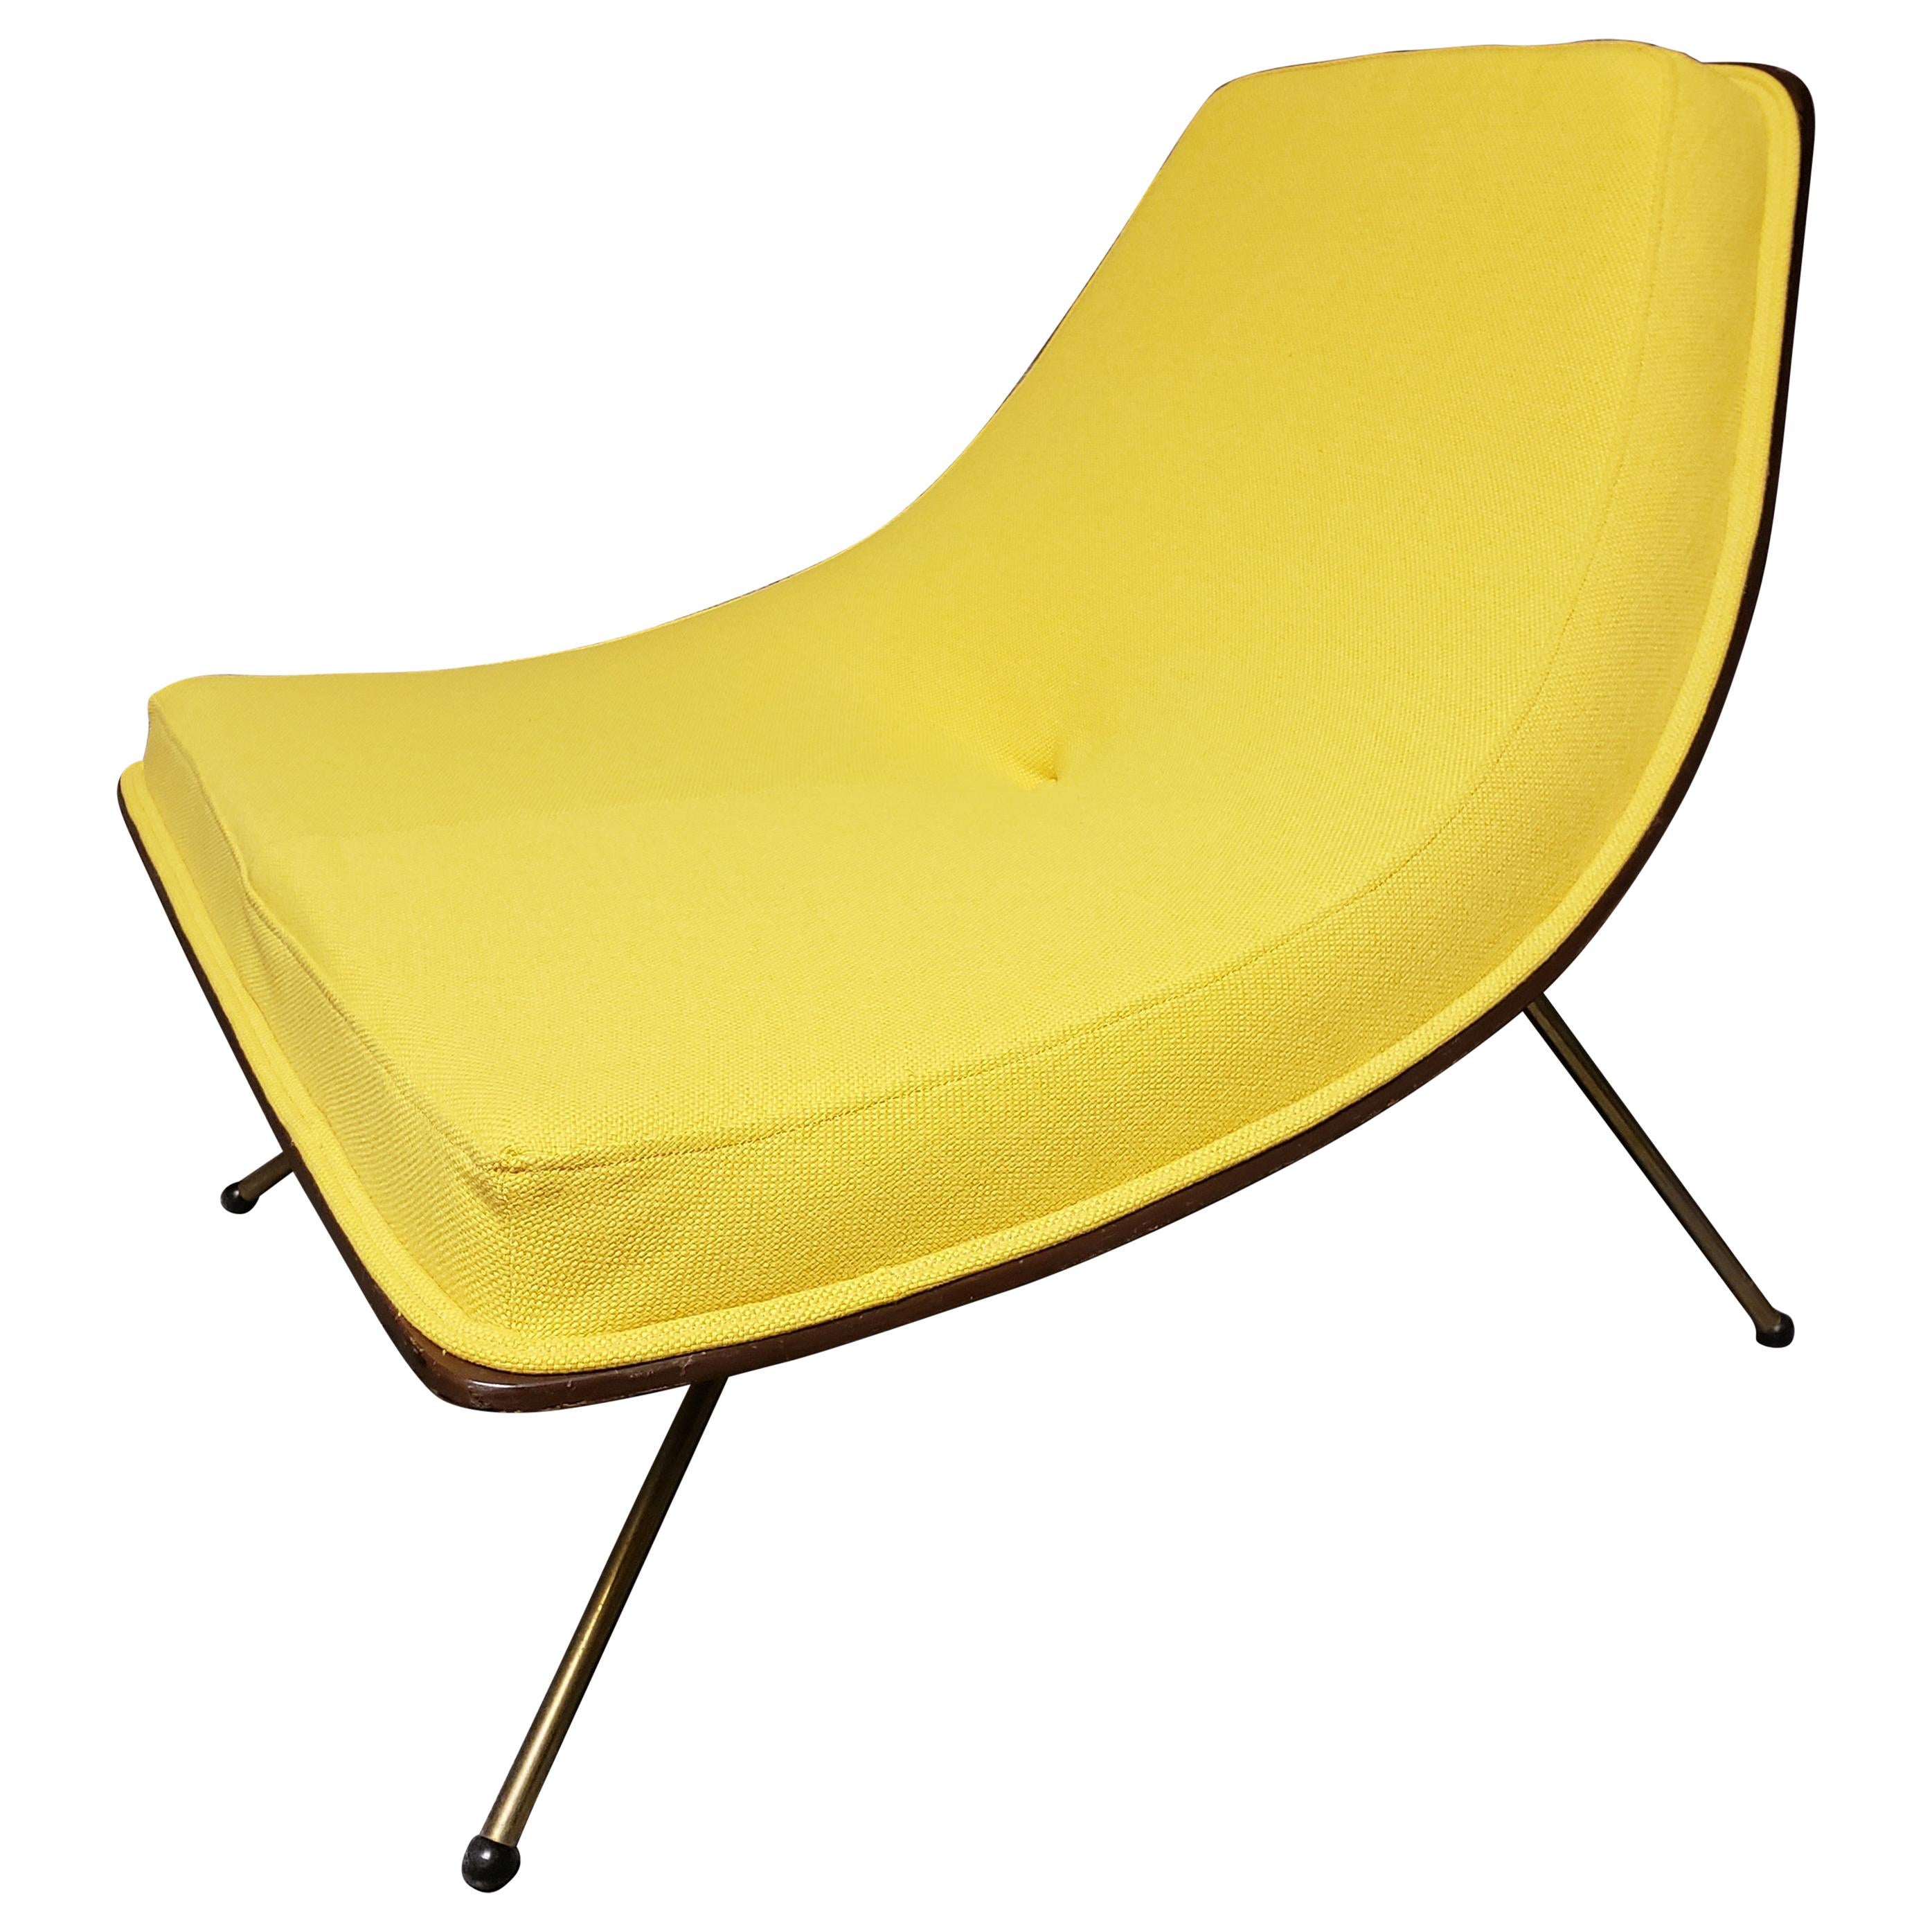 A. J. Donahue "Winnipeg Chair" or "The Canadian Coconut Chair"